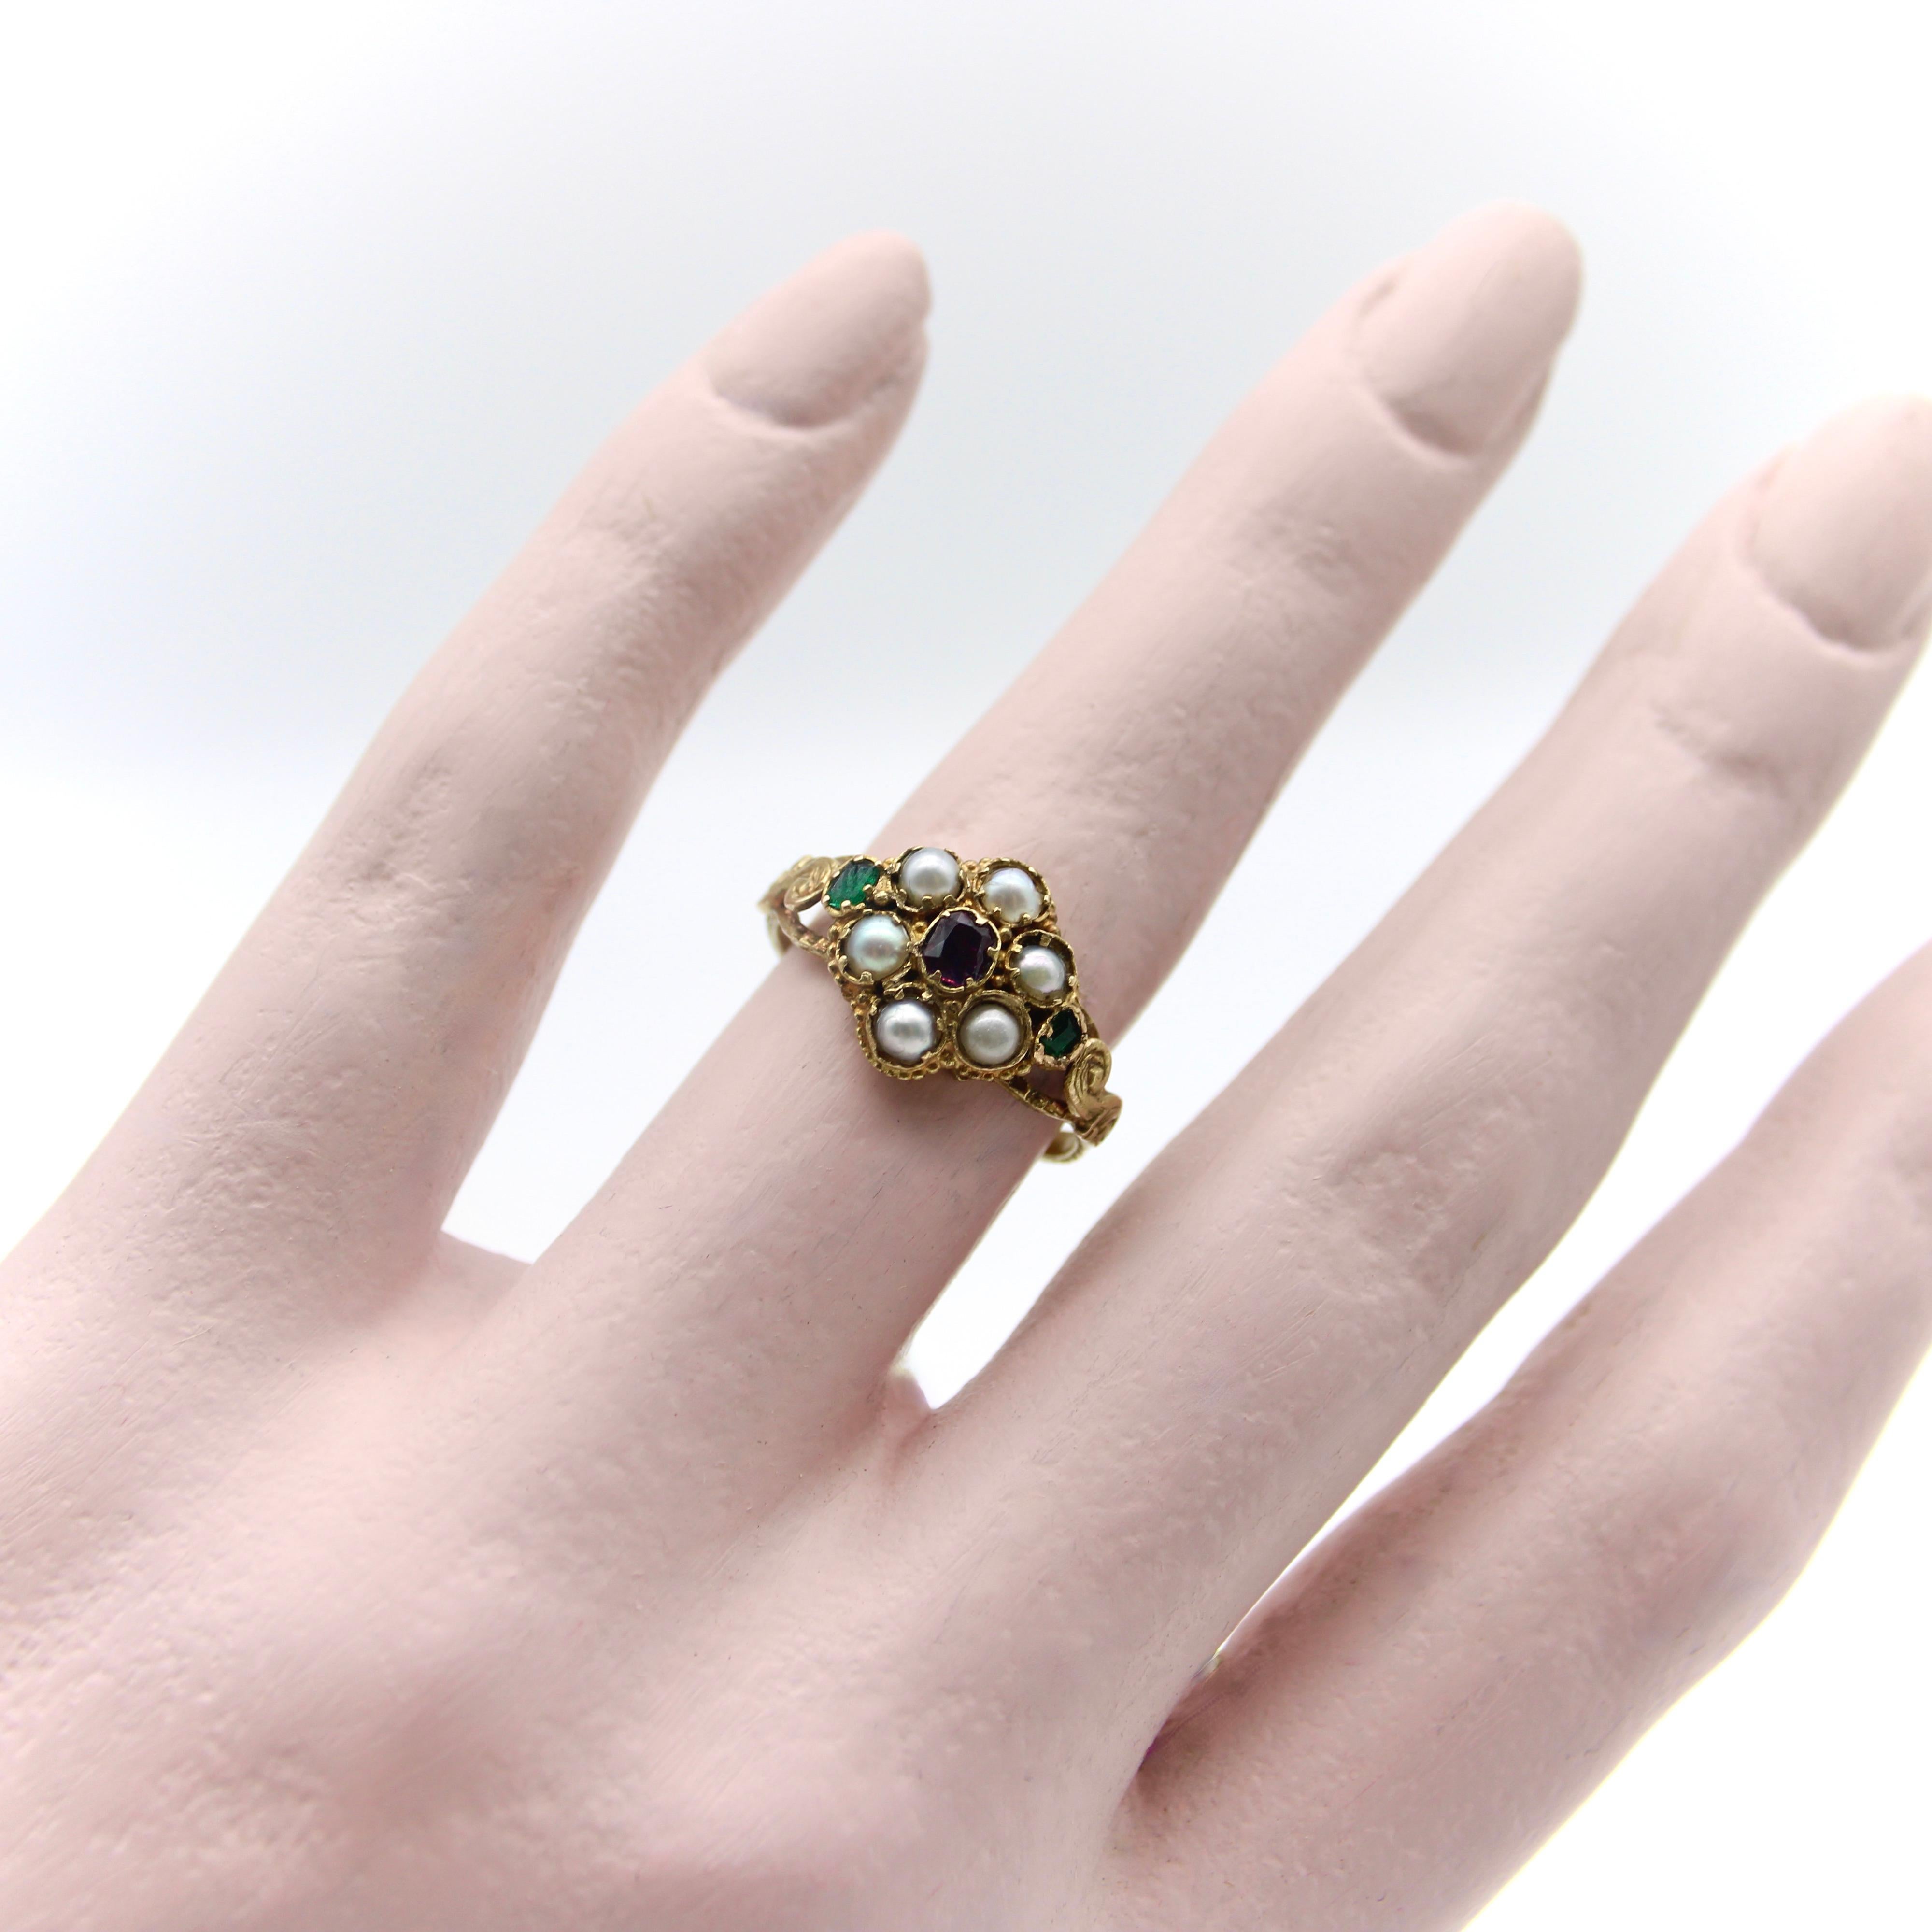 Emerald Cut 12k Gold Early Victorian Flower Ring with Garnet, Emeralds, and Pearls For Sale